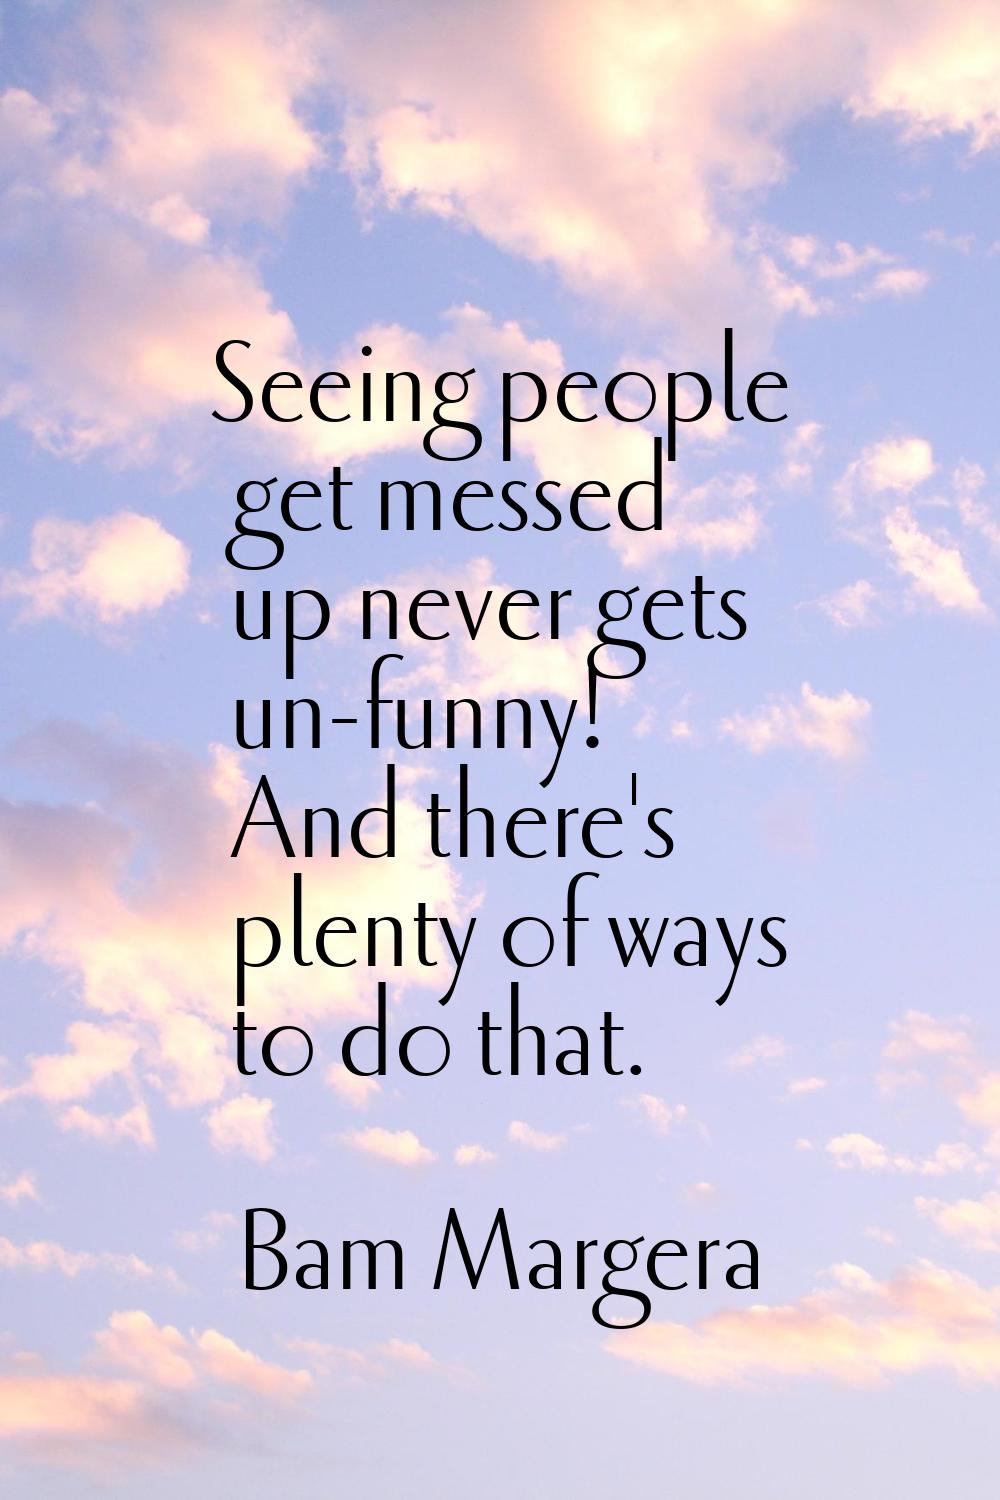 Seeing people get messed up never gets un-funny! And there's plenty of ways to do that.